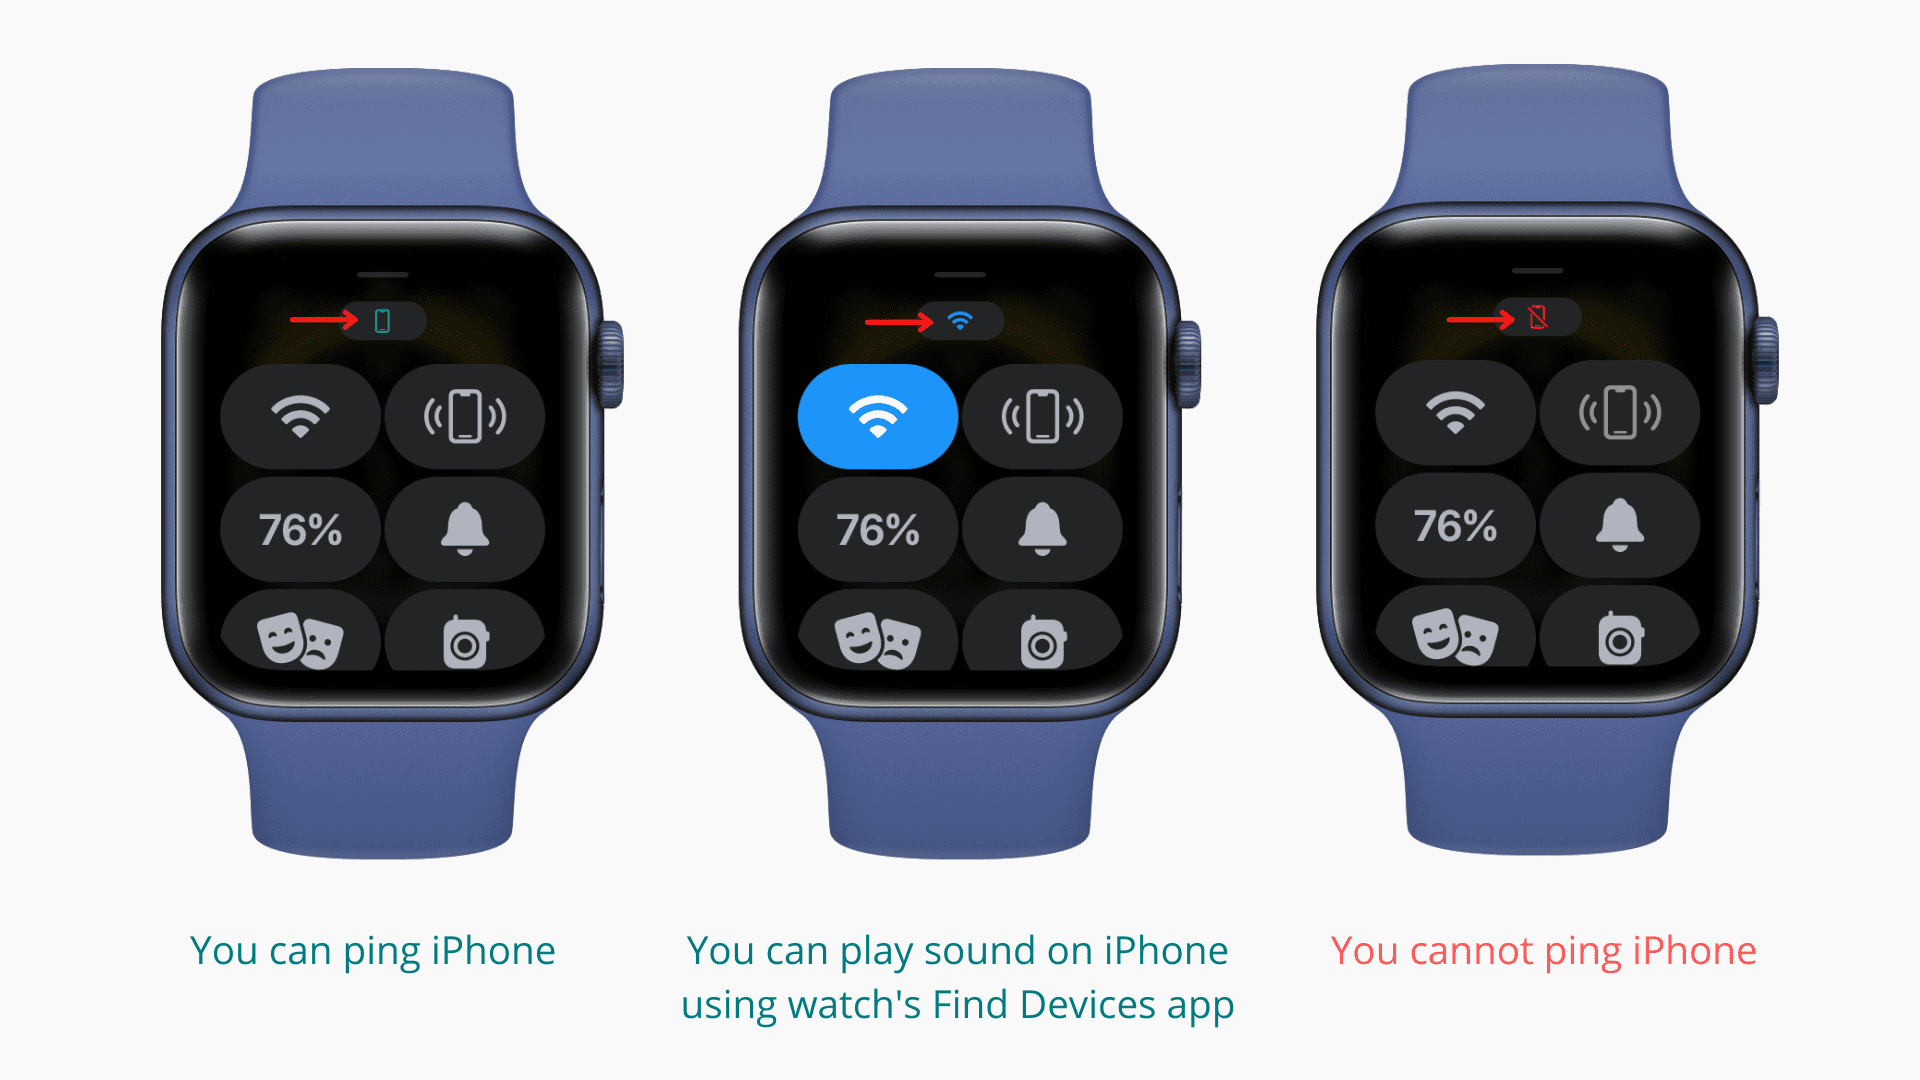 When can you ping your iPhone using Apple Watch and when you cannot